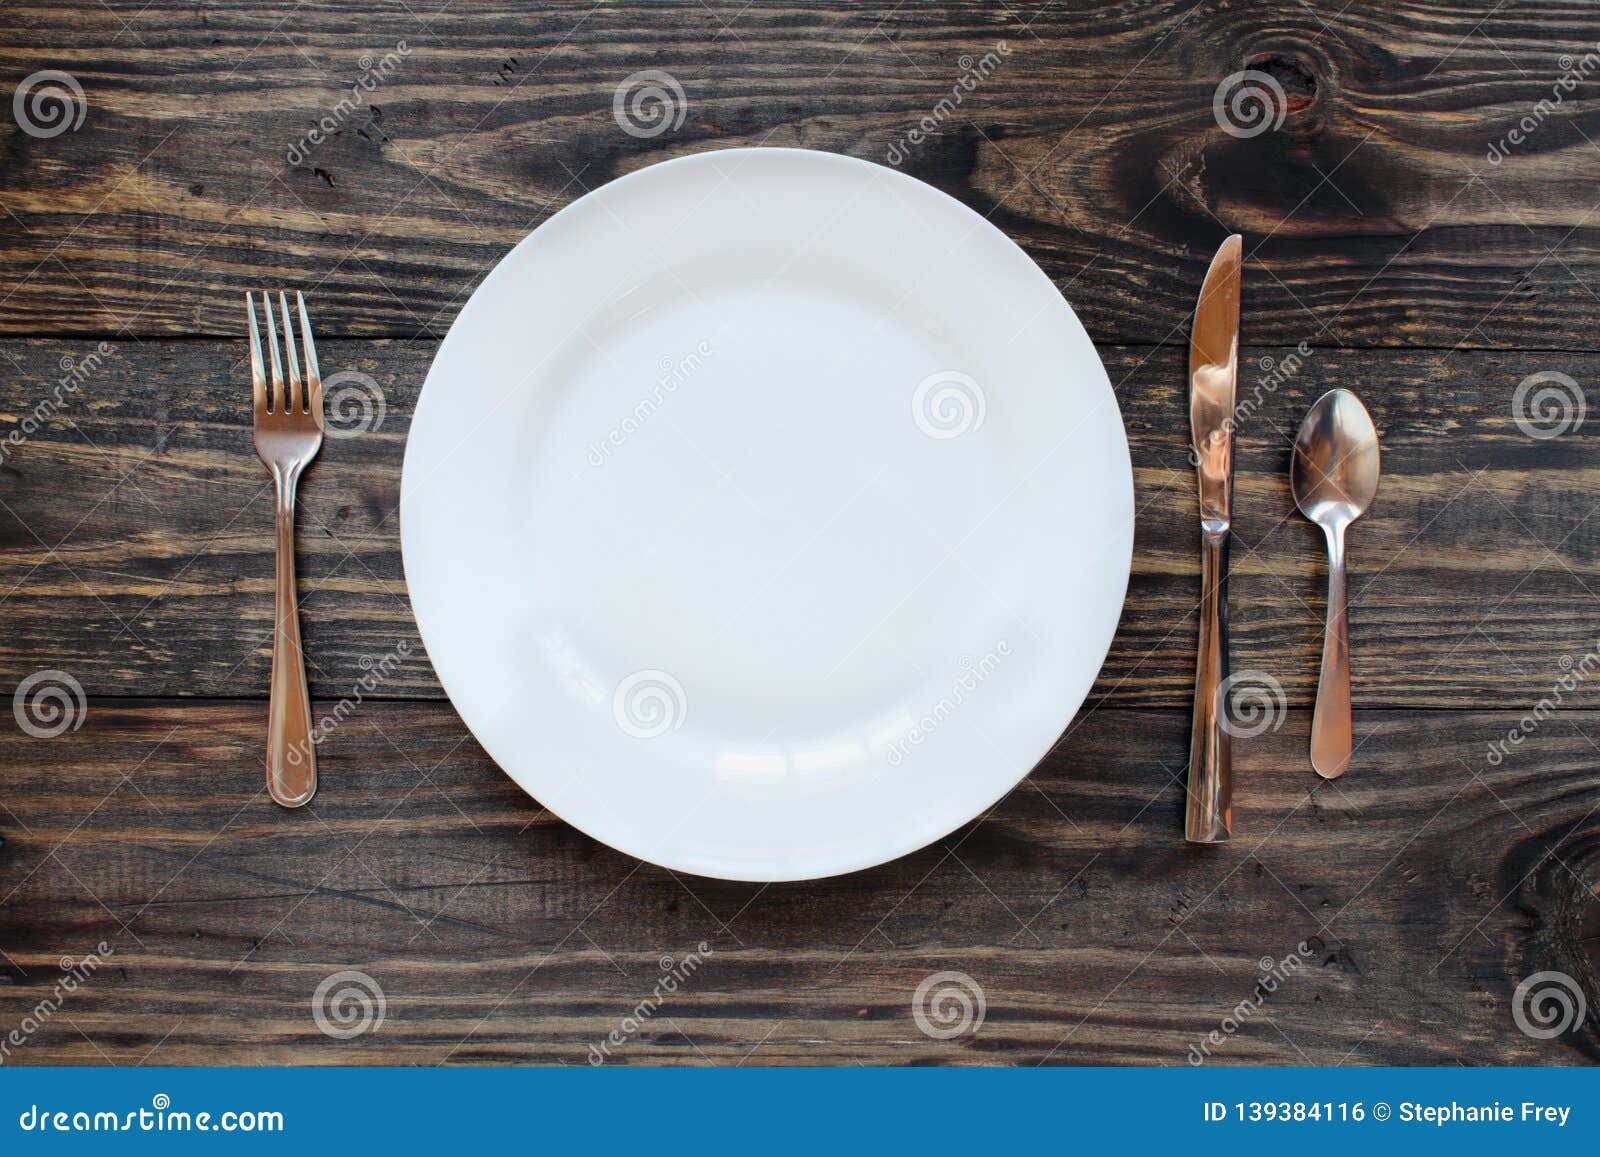 Empty White Dinner Plate Shot From Above Stock Photo Image of fork, life 139384116